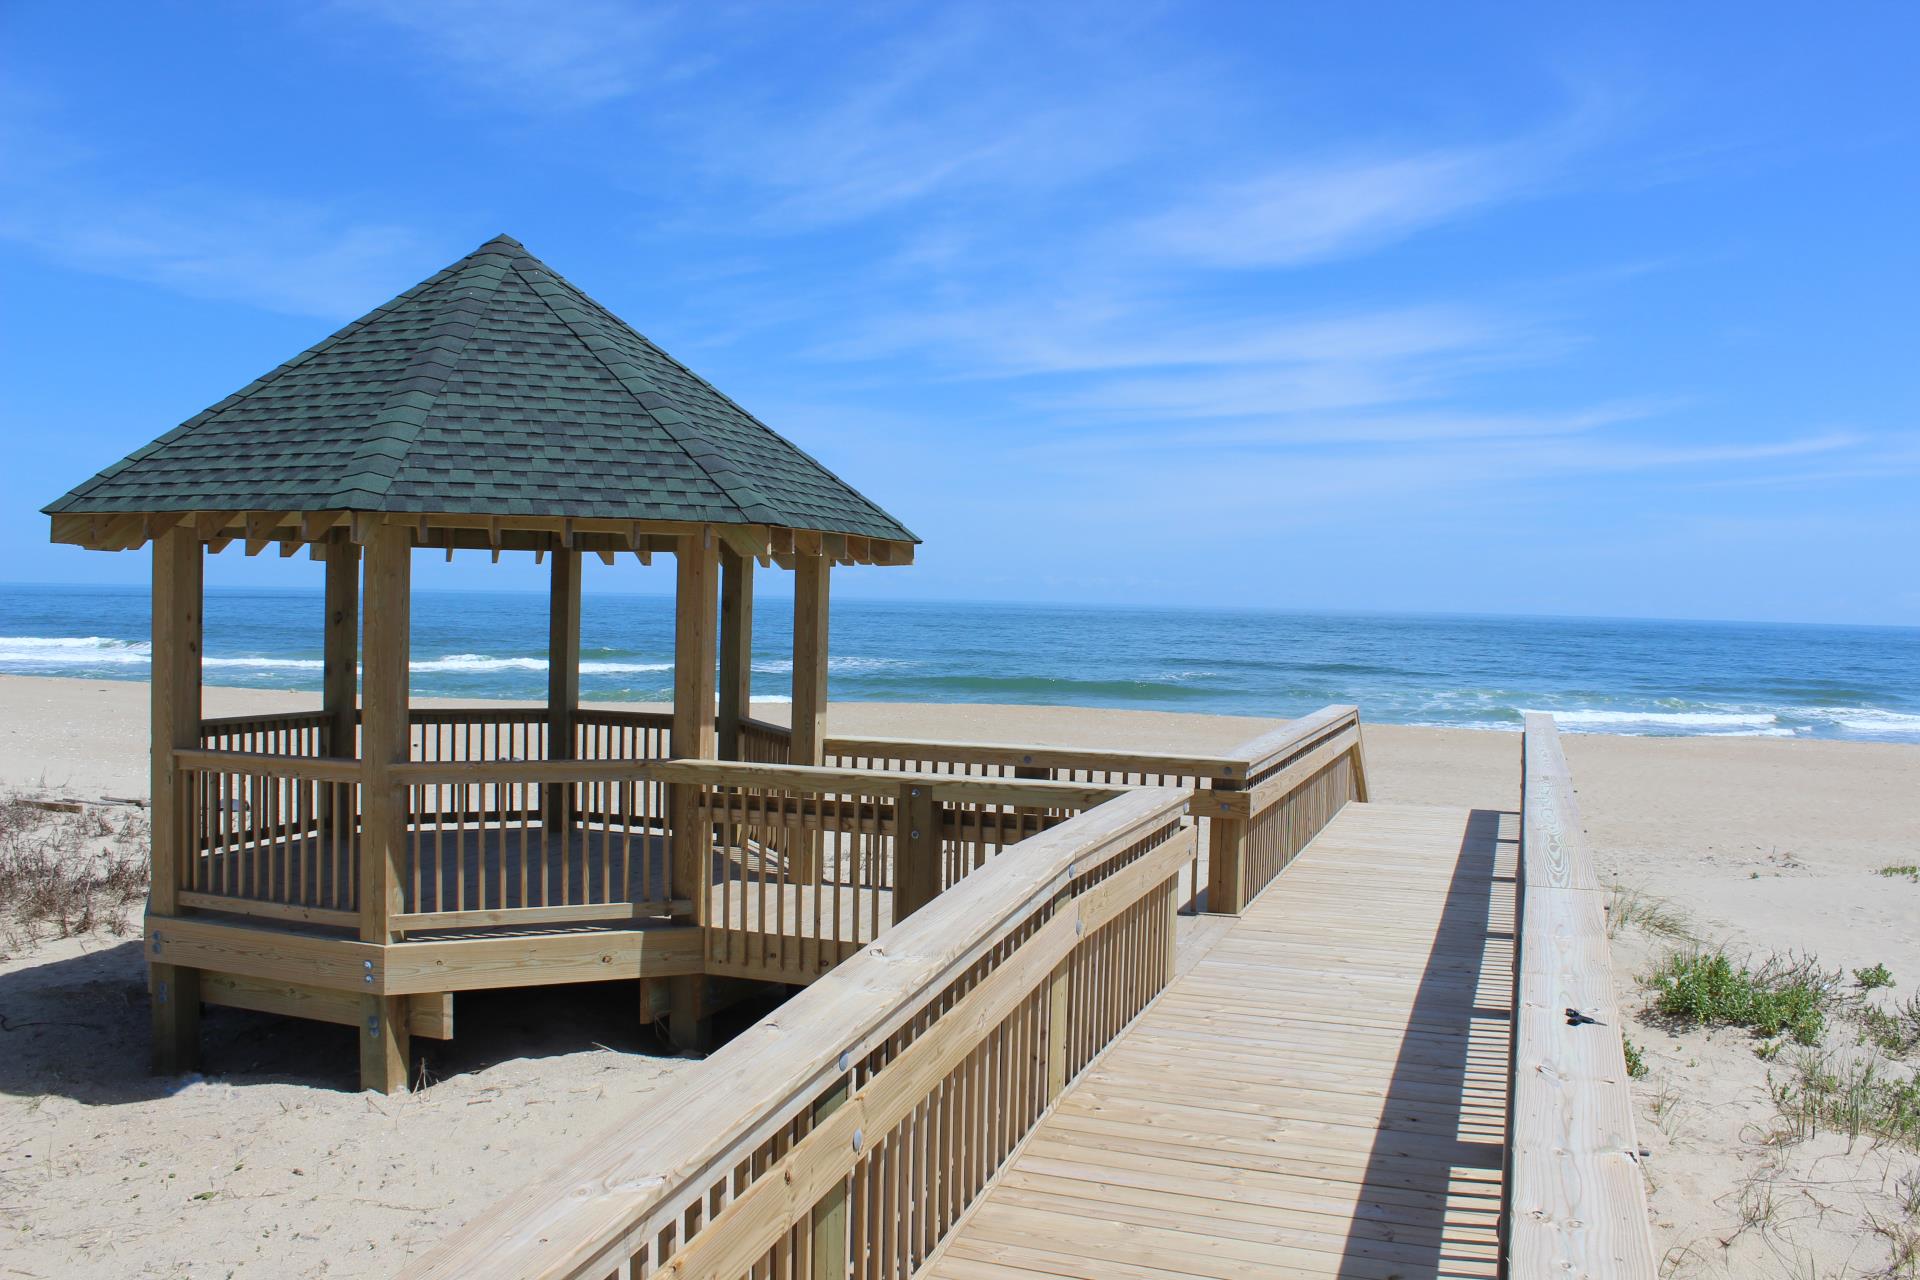 Things To Do In Rodanthe, NC